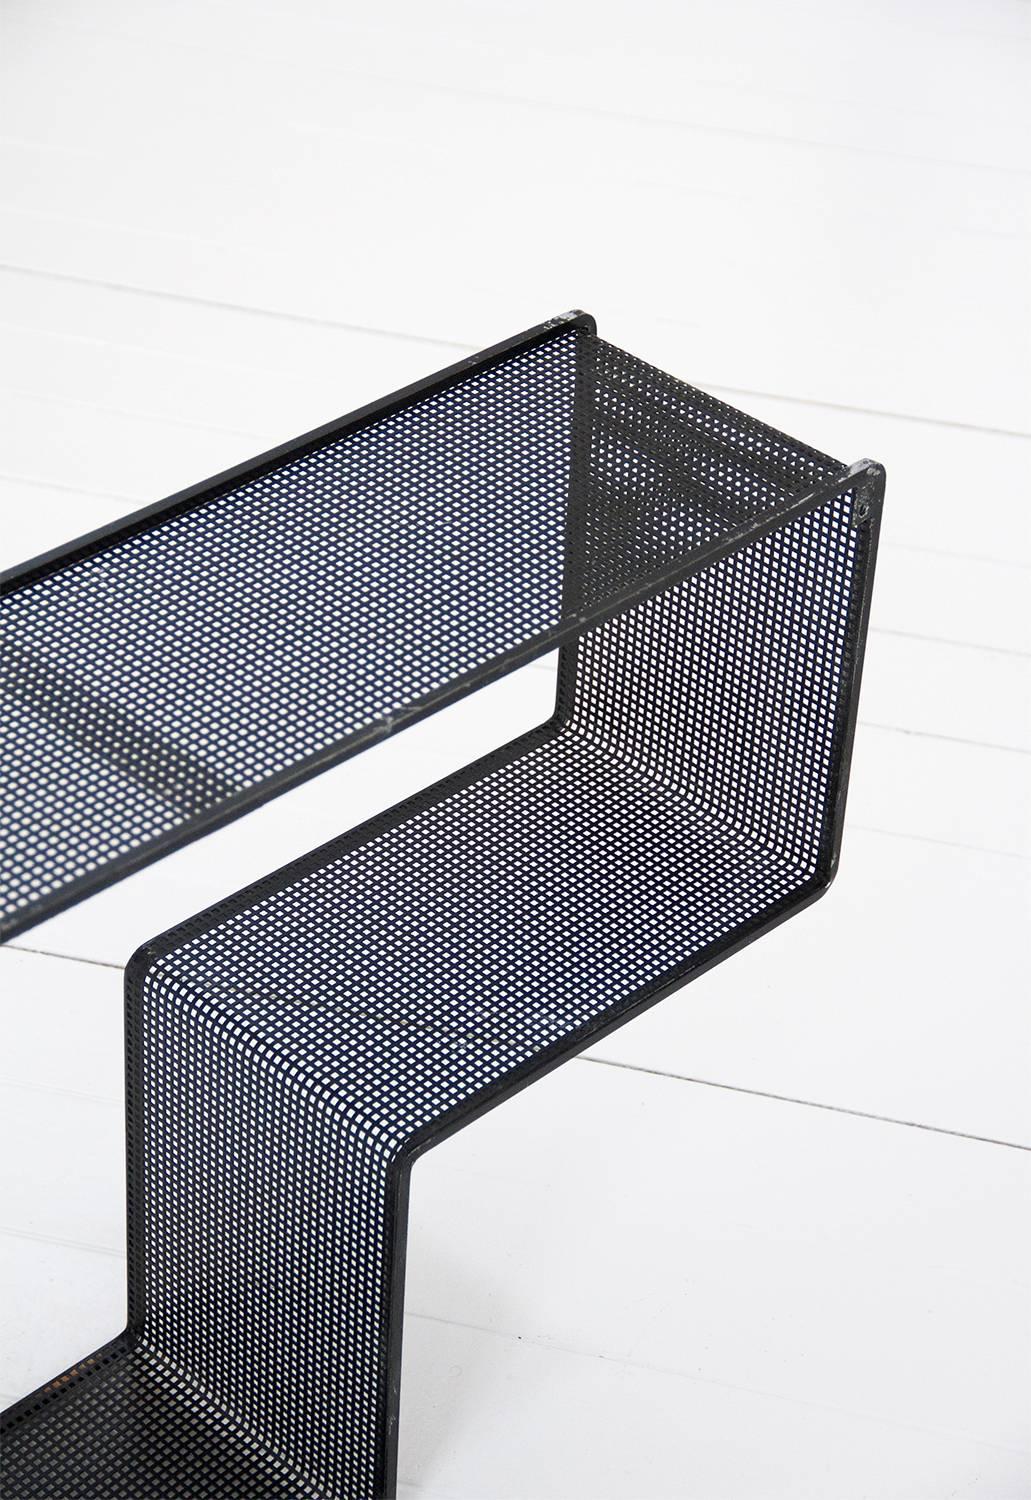 Black Dedal Wall Shelf by Mathieu Mategot, Perforated Steel, circa 1950, France For Sale 1